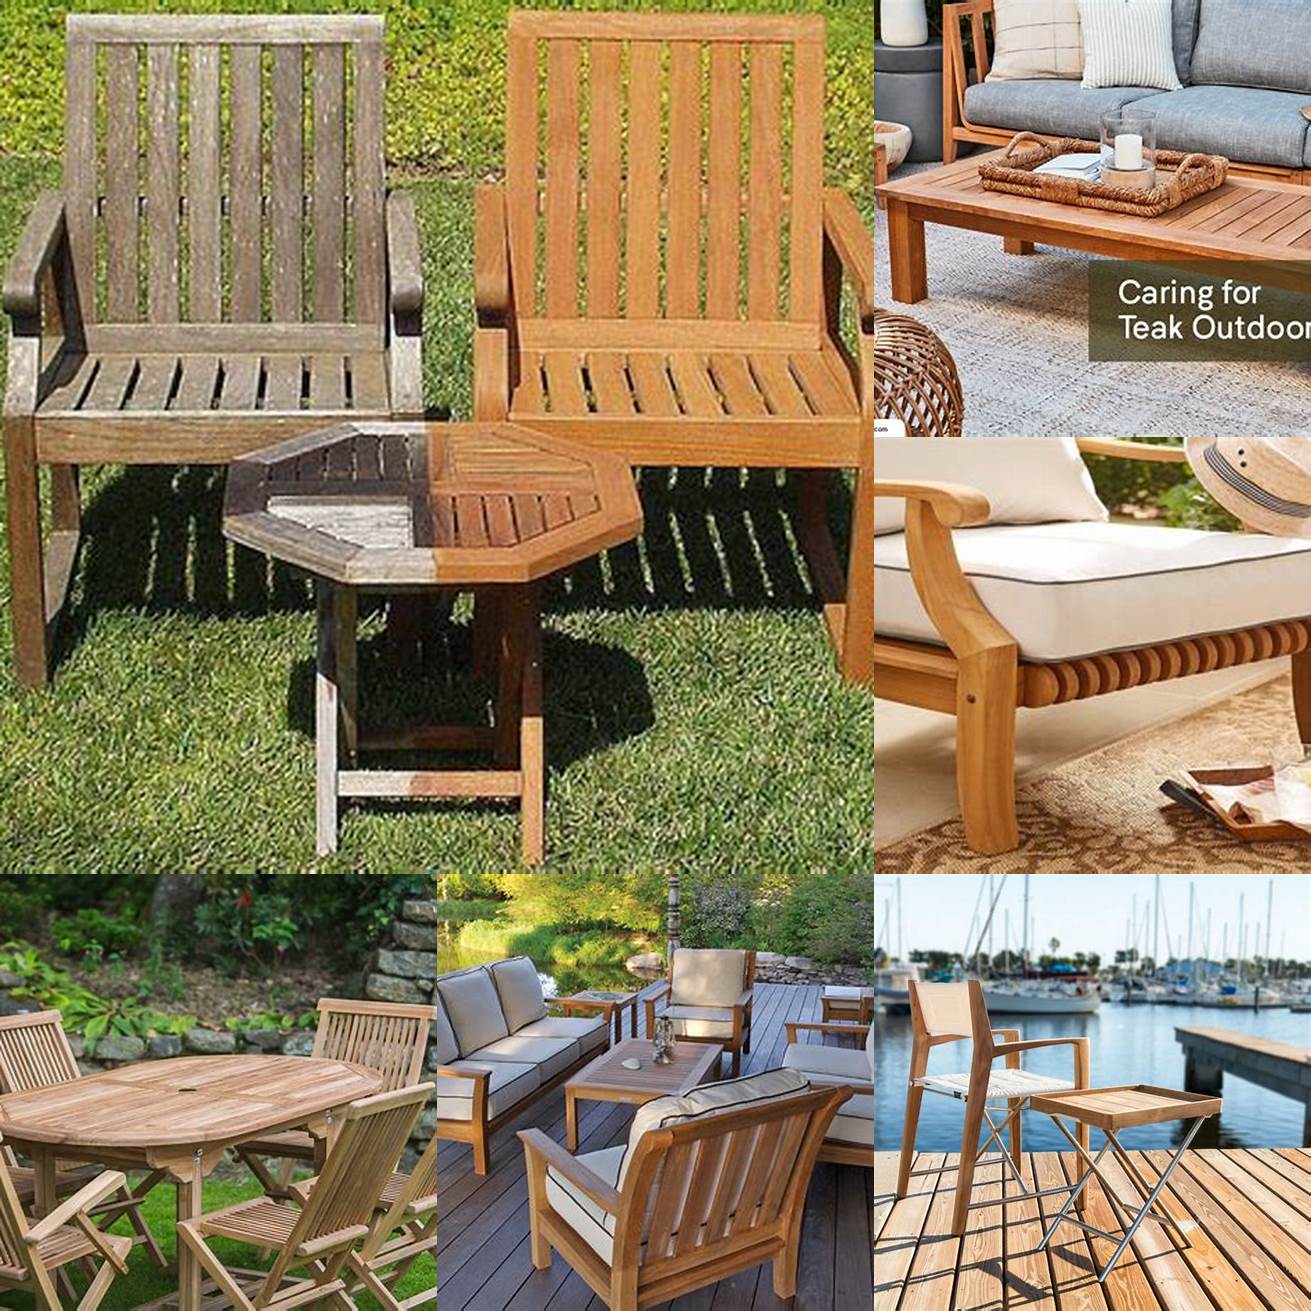 Caring for Teak Furniture in the Summer